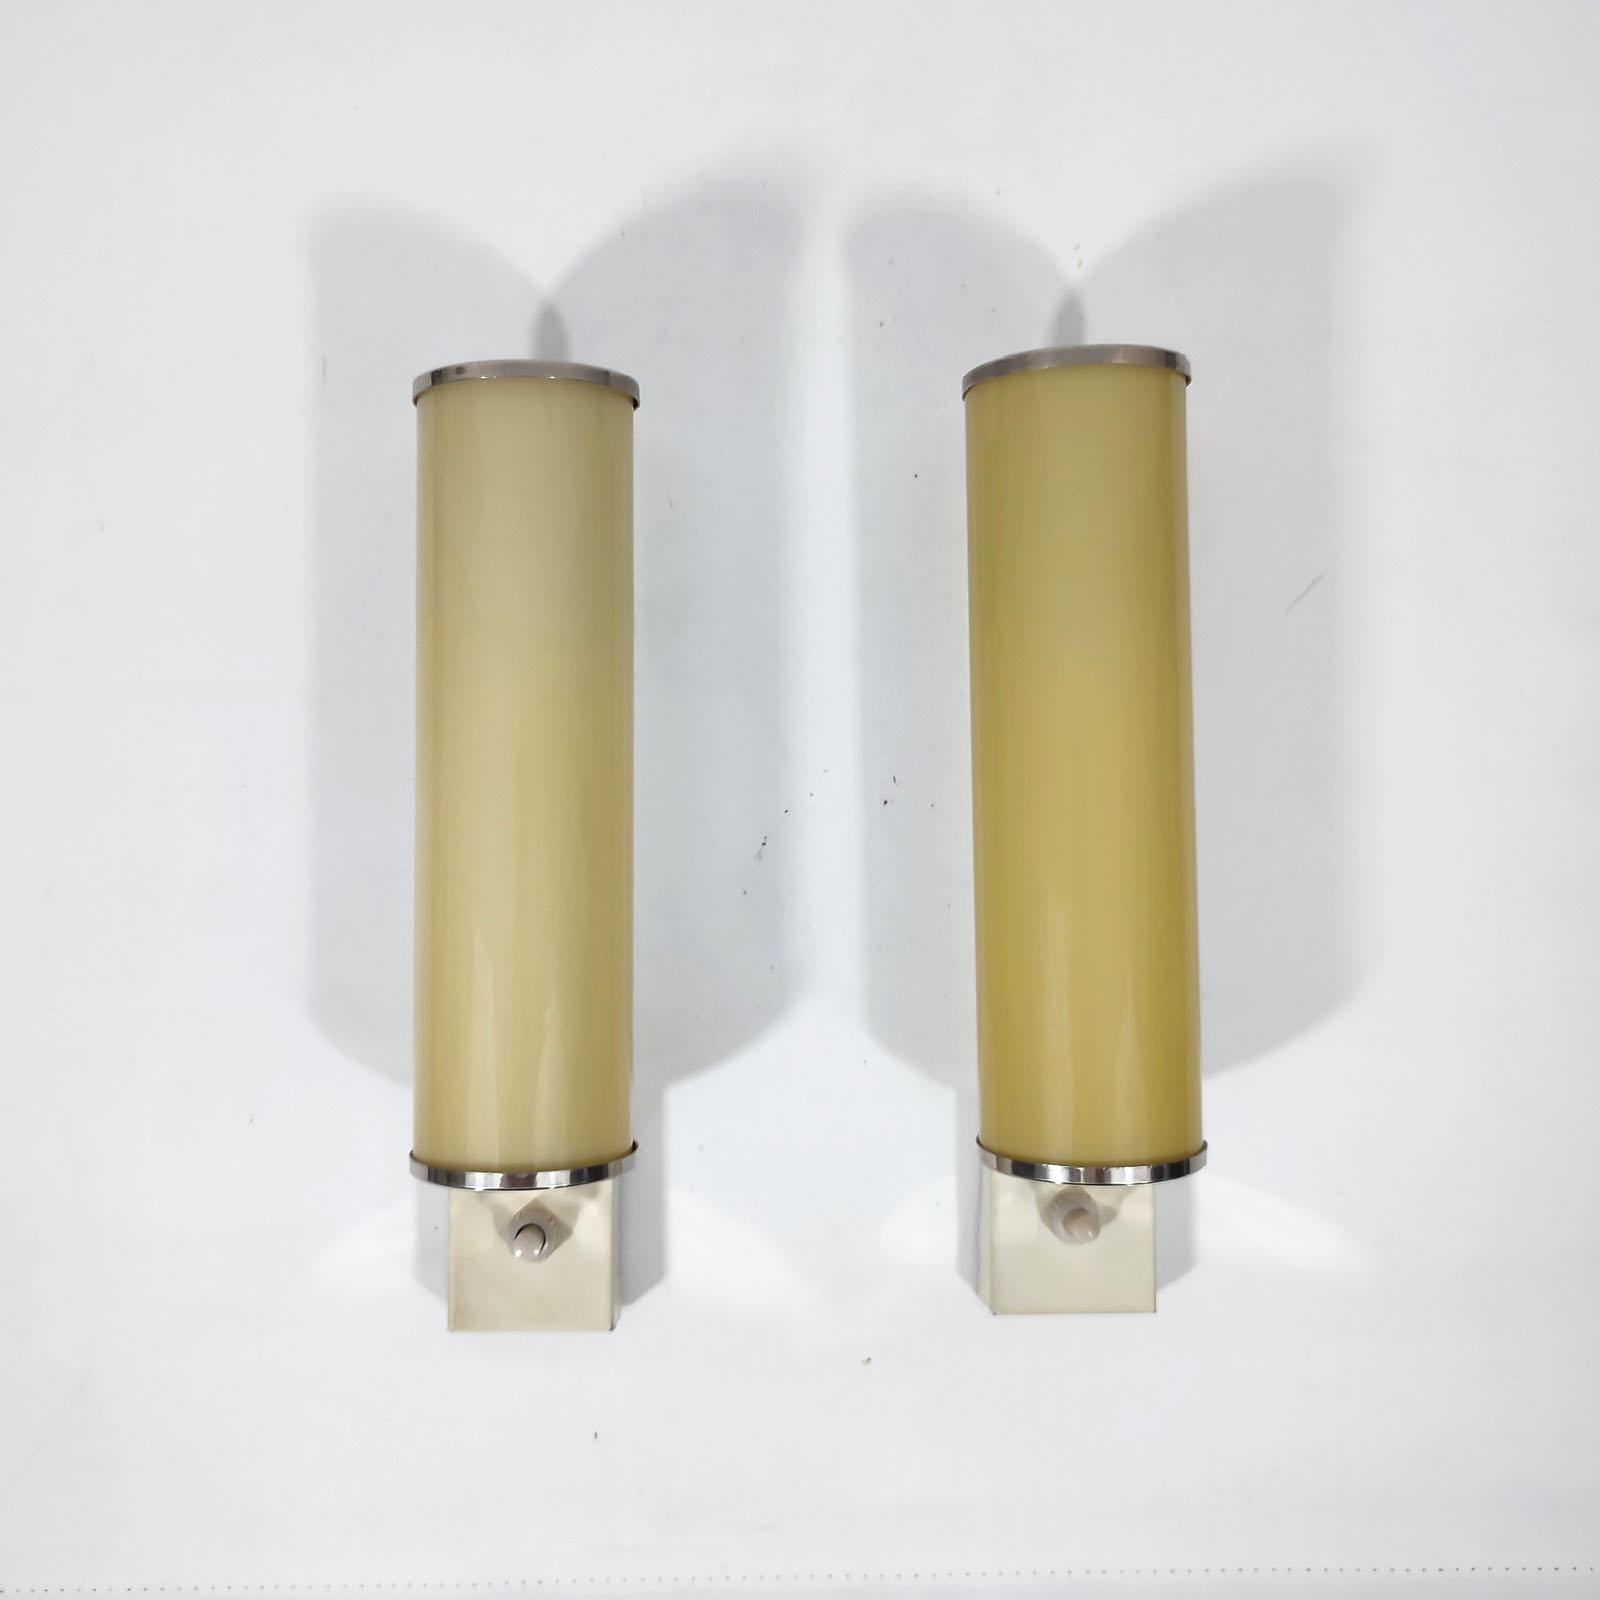 Bauhaus Wall Lights, Pair, Chrome and Glass, Germany 1930s For Sale 5